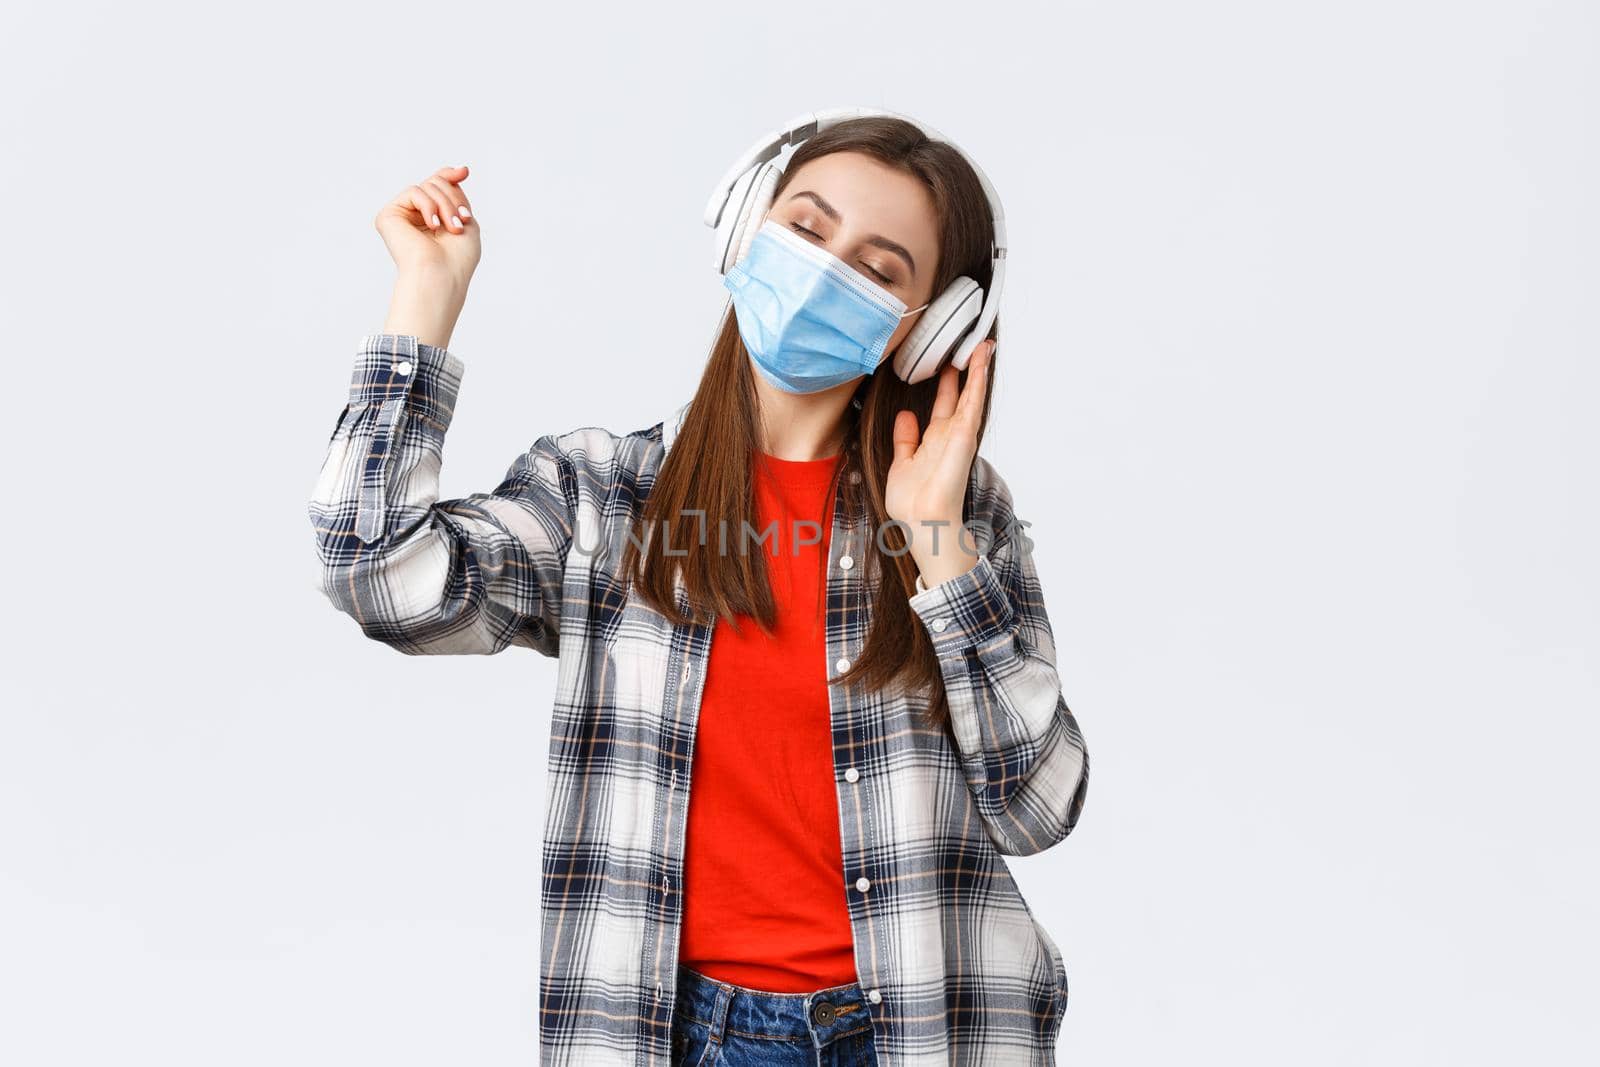 Social distancing, leisure and lifestyle on covid-19 outbreak, coronavirus concept. Carefree tender young woman carried away listening music in headphones, dancing with closed eyes in medical mask.